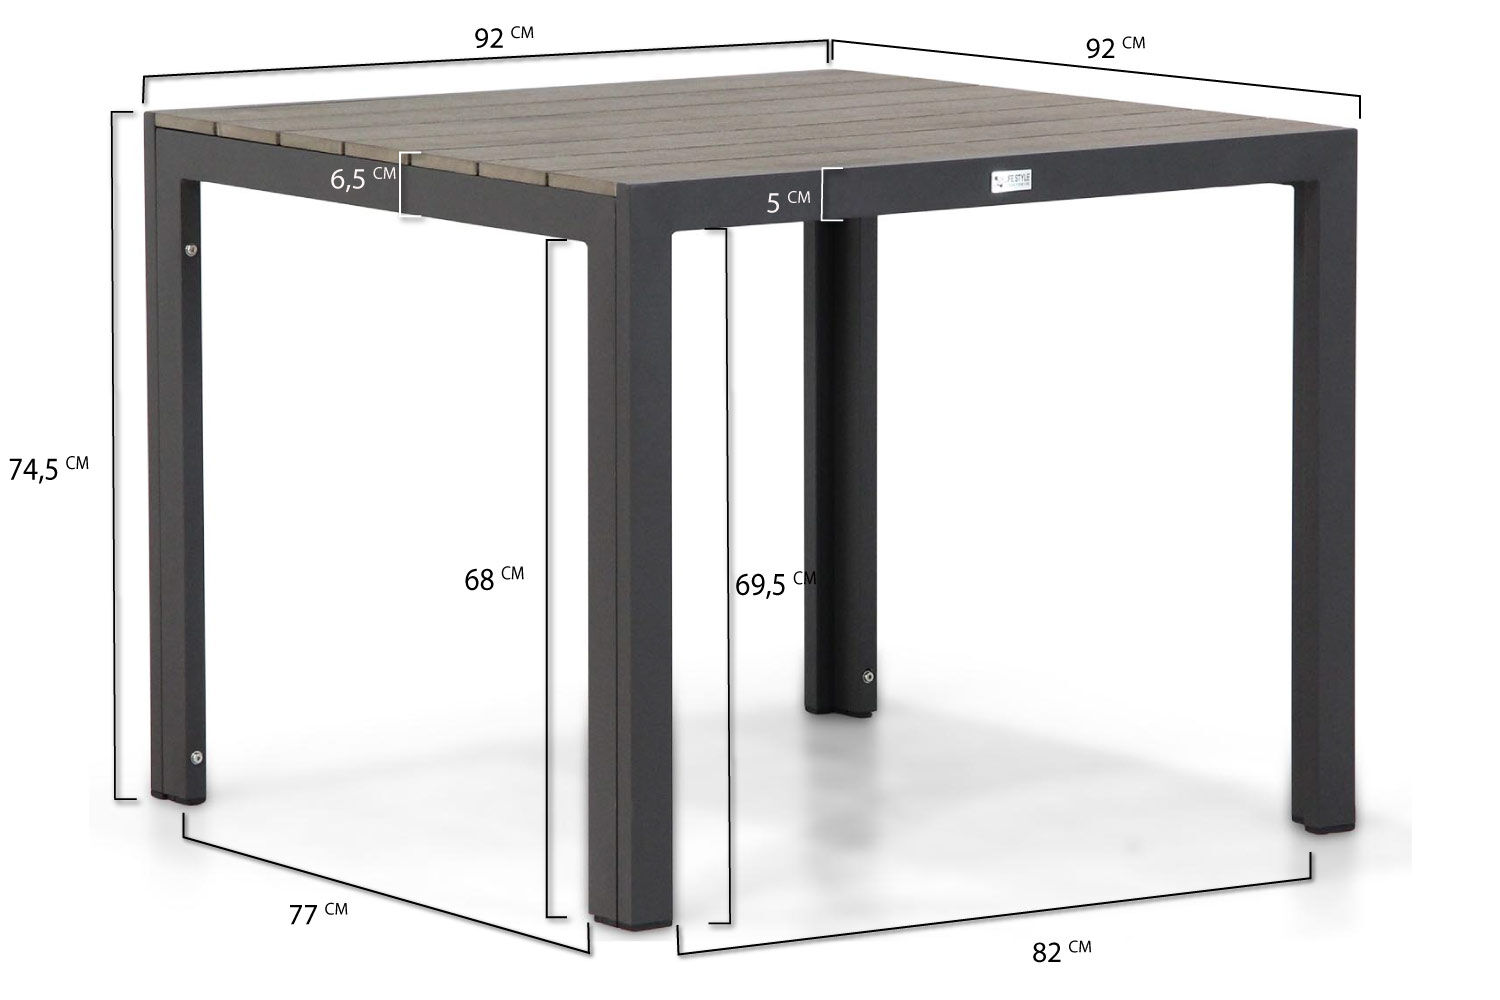 Lifestyle Parma/Young 92 cm dining tuinset 5-delig